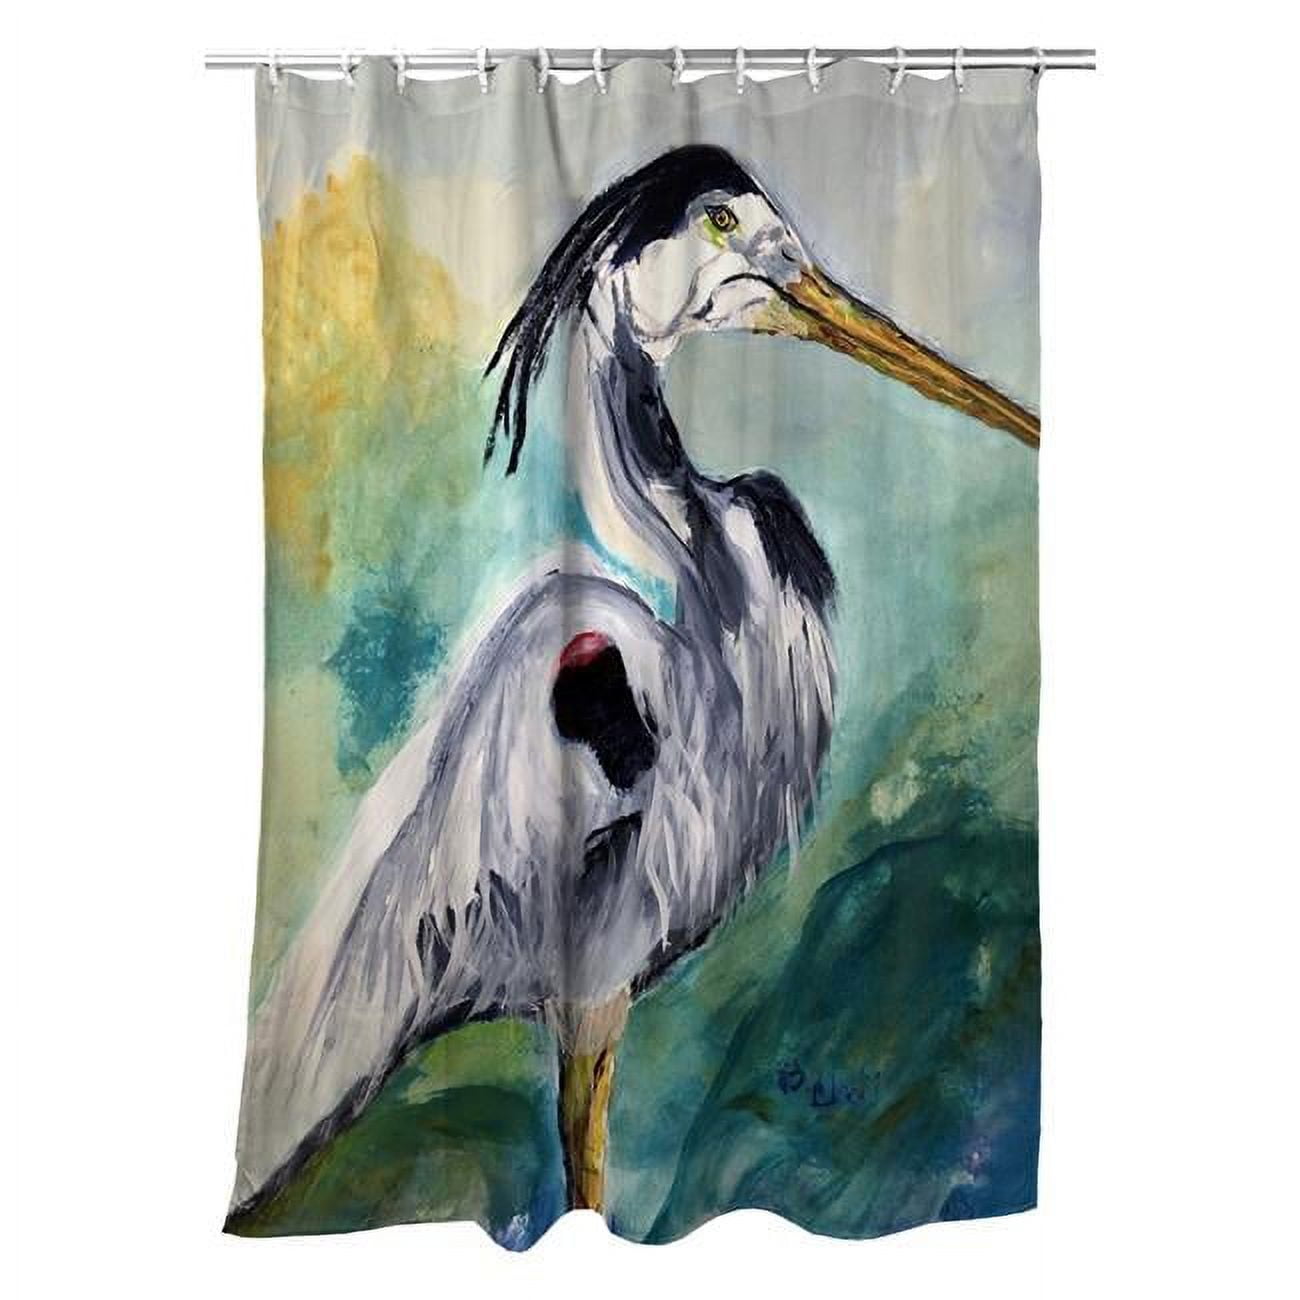 Picture of Betsydrake SH1171 71 x 74 in. Betsys Blue Heron Shower Curtain